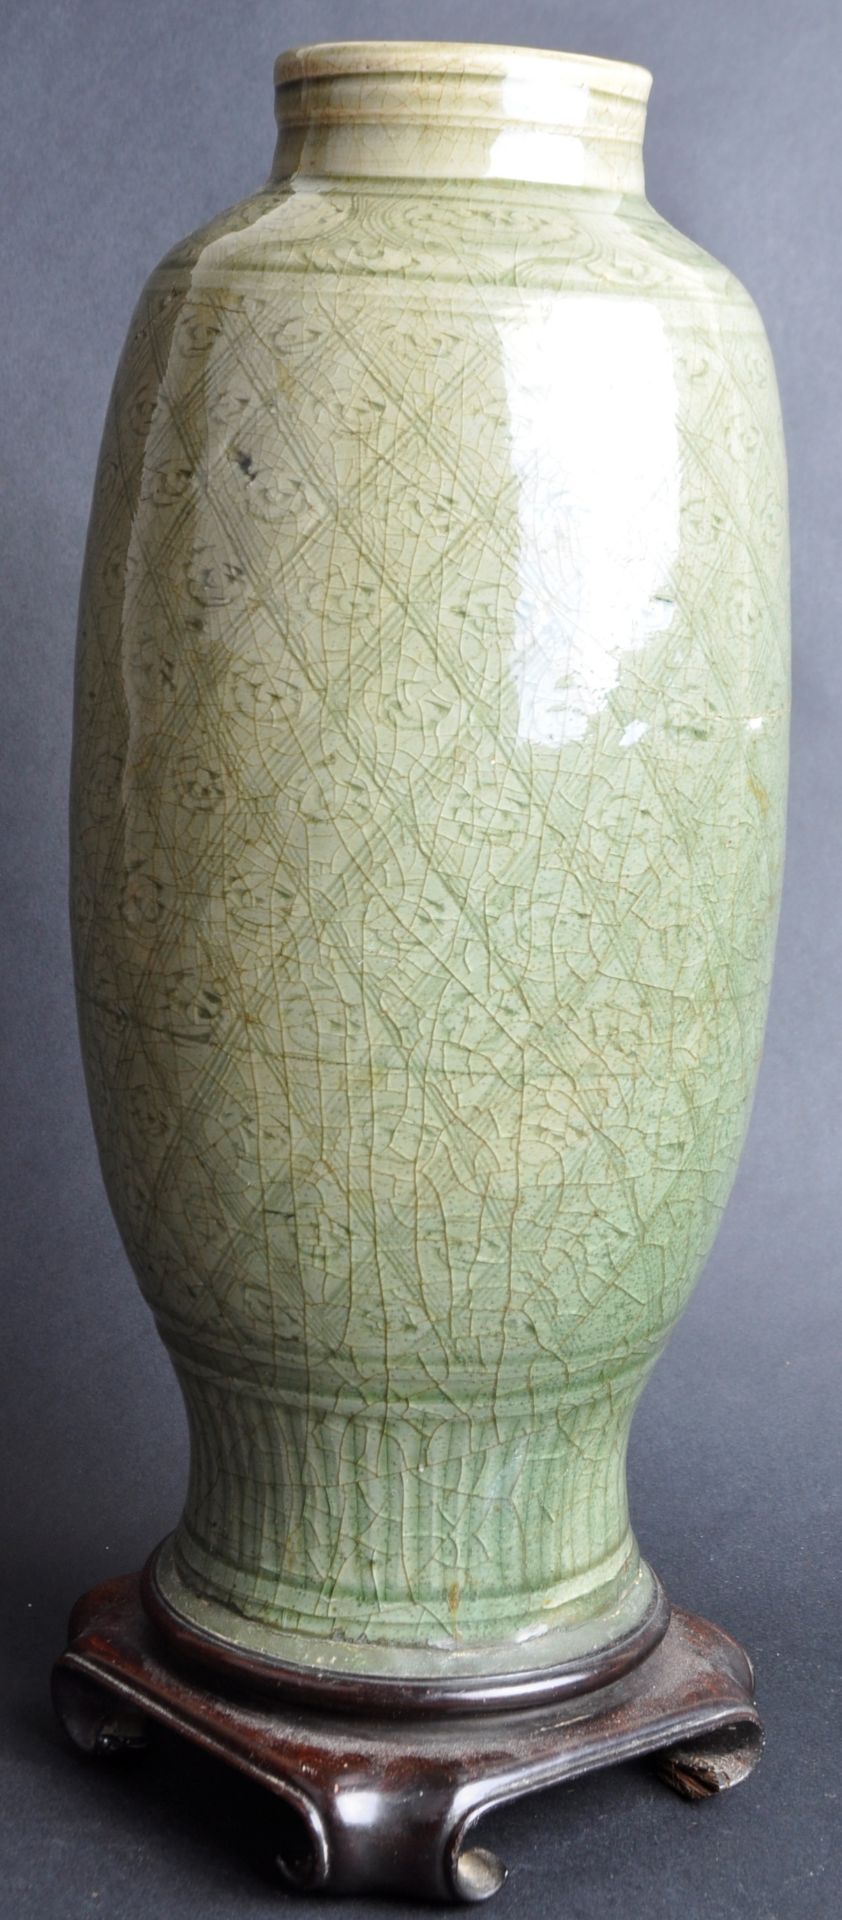 BELIEVED CHINESE MING DYNASTY 17TH CENTURY CELADON VASE - Image 5 of 5